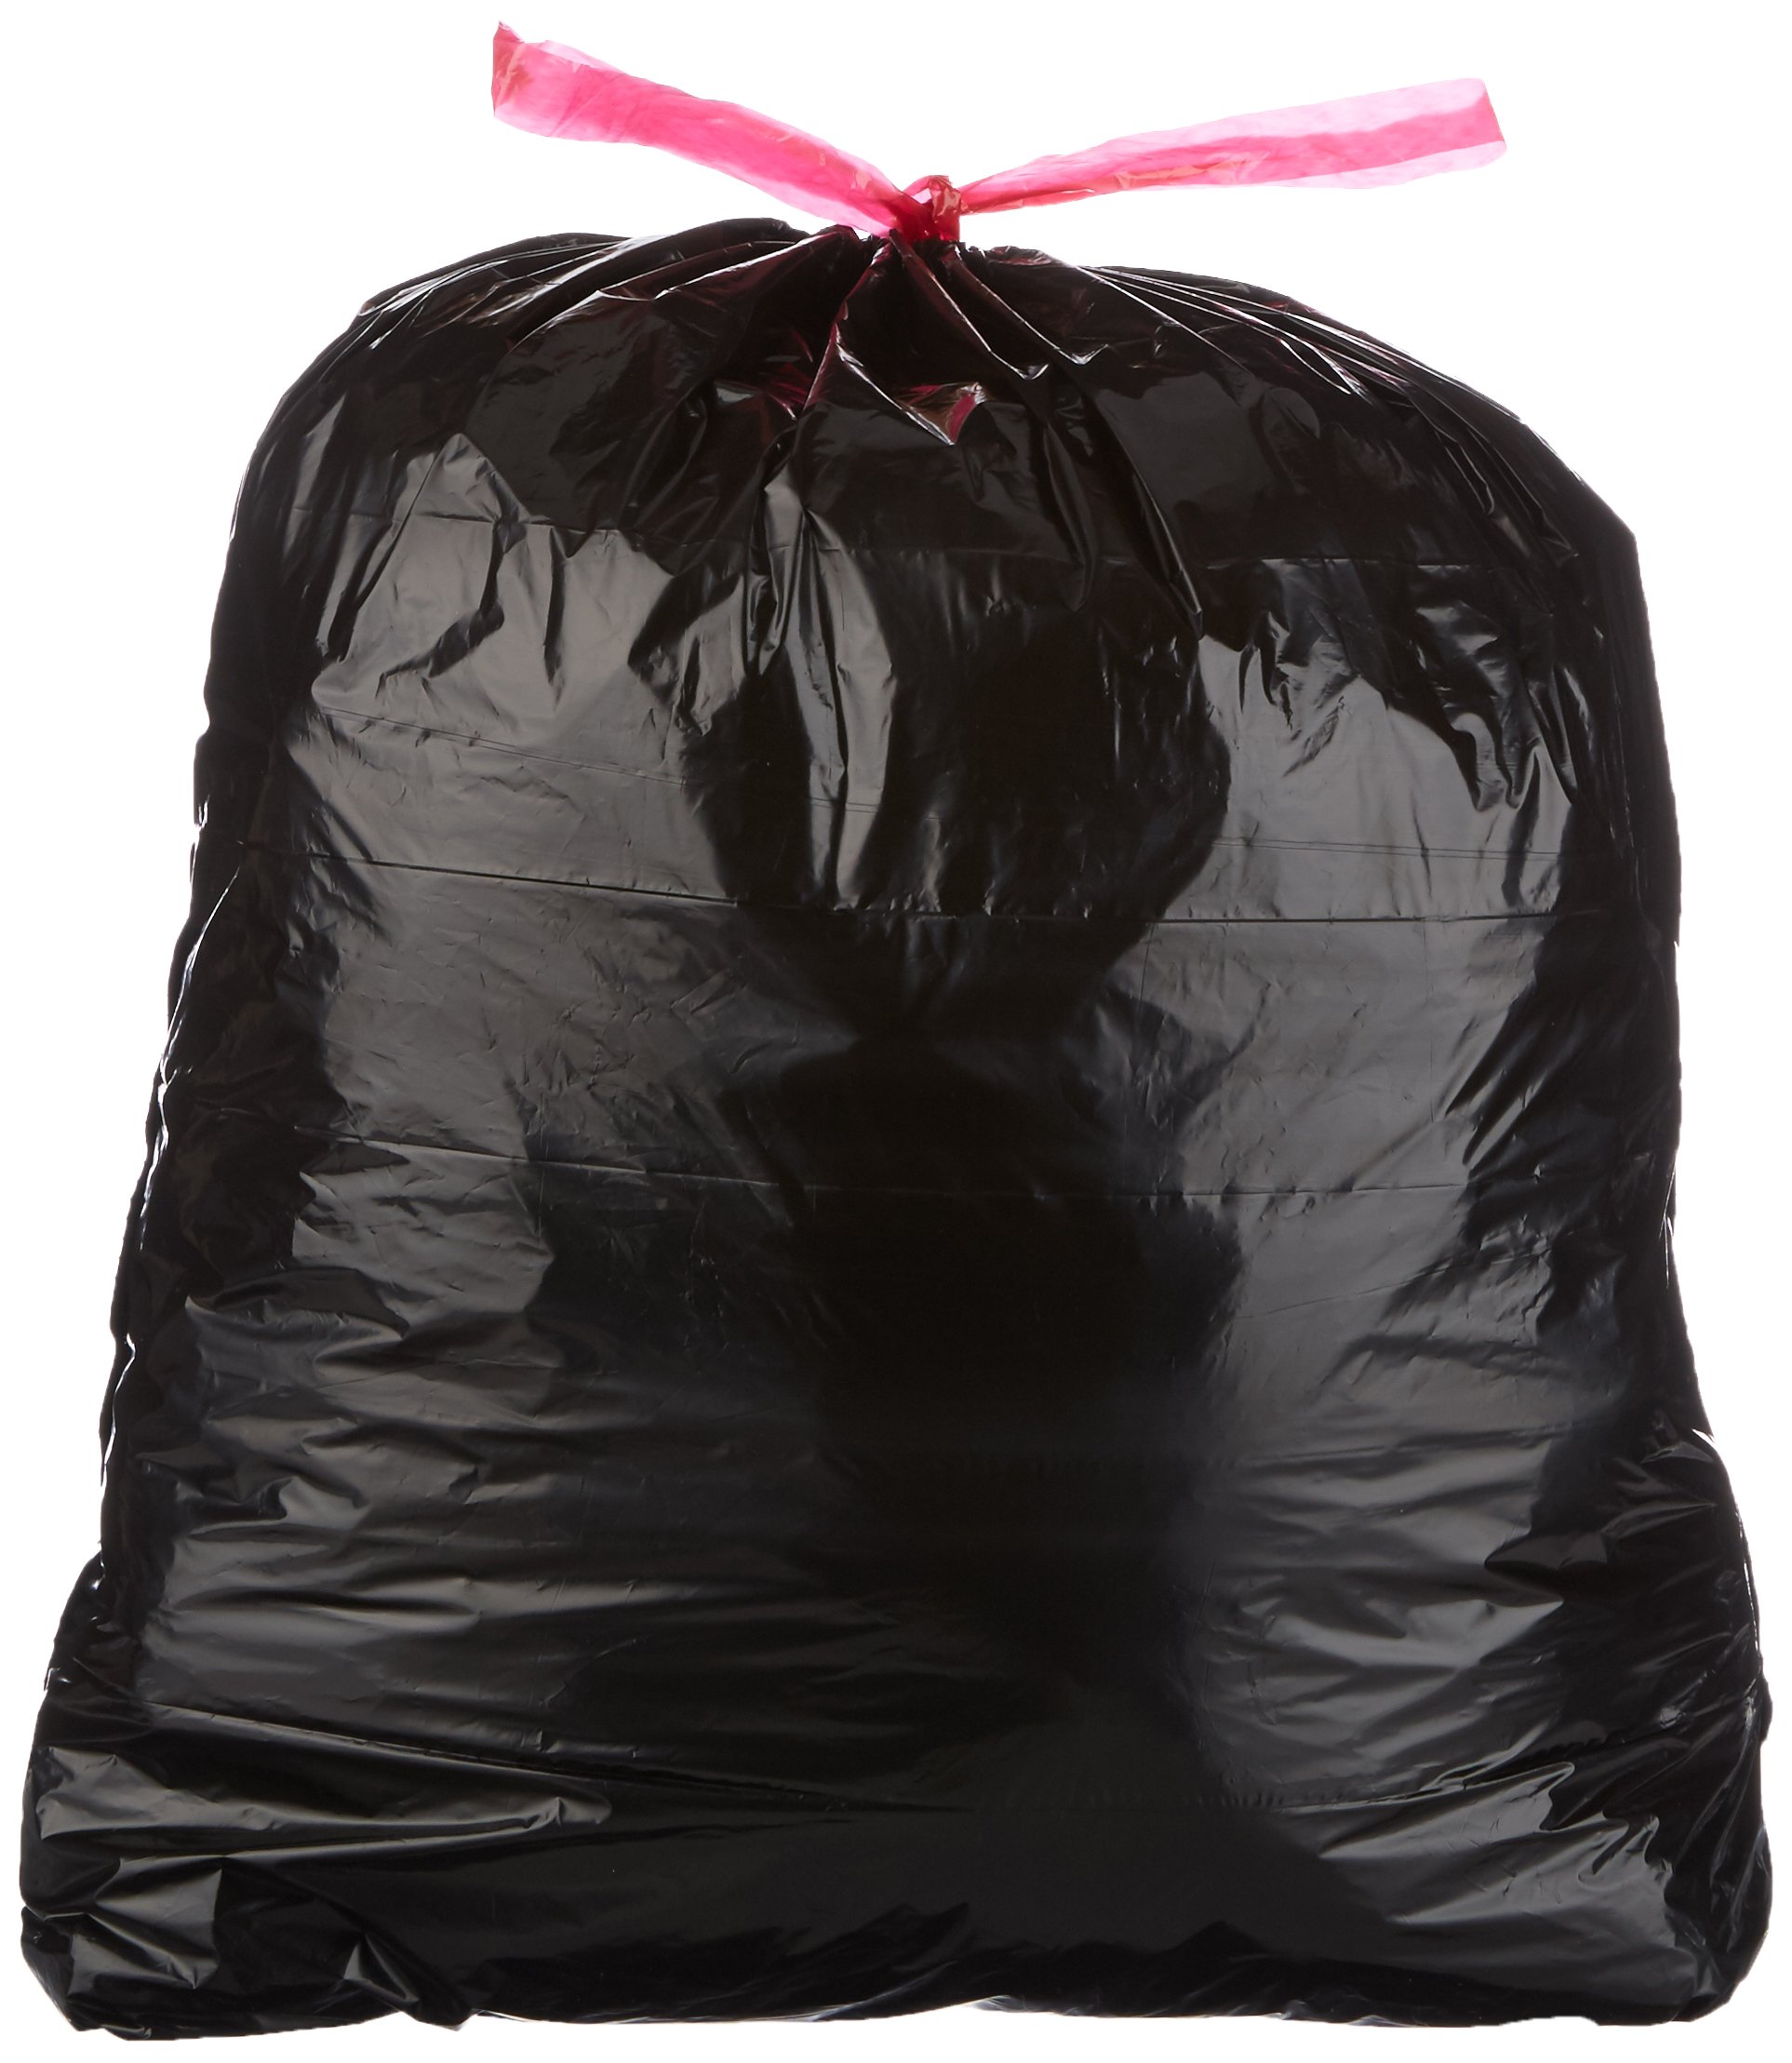 Book Cover Amazon Basics 30 Gallon Large Trash Bag with Draw Strings, 1.2 mil, 120-Count